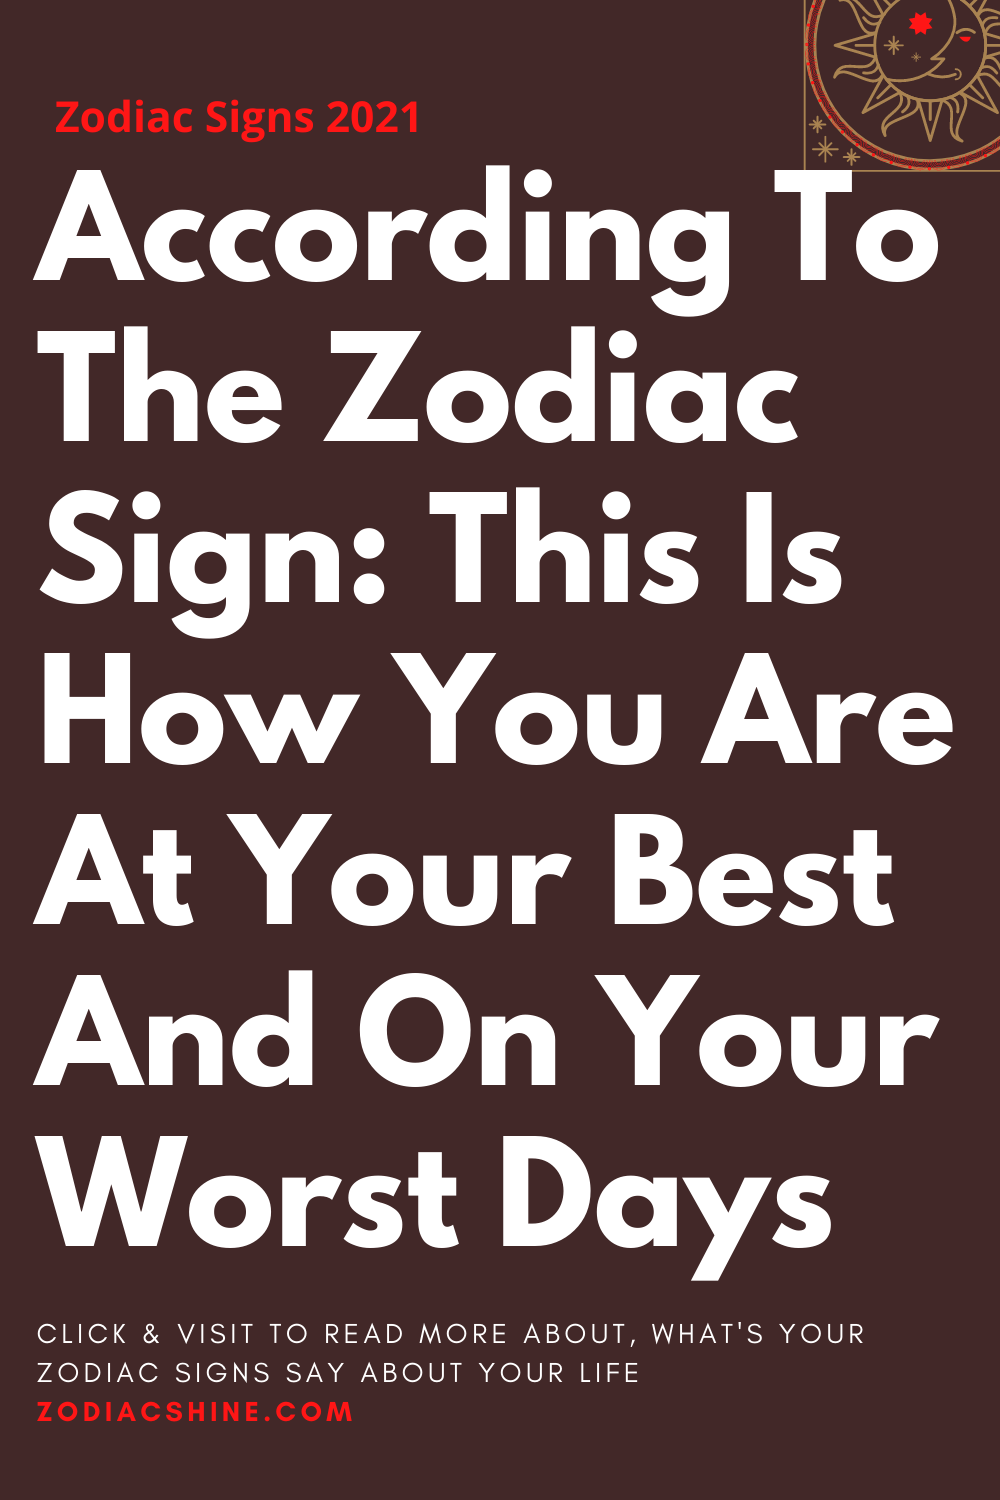 According To The Zodiac Sign: This Is How You Are At Your Best And On Your Worst Days